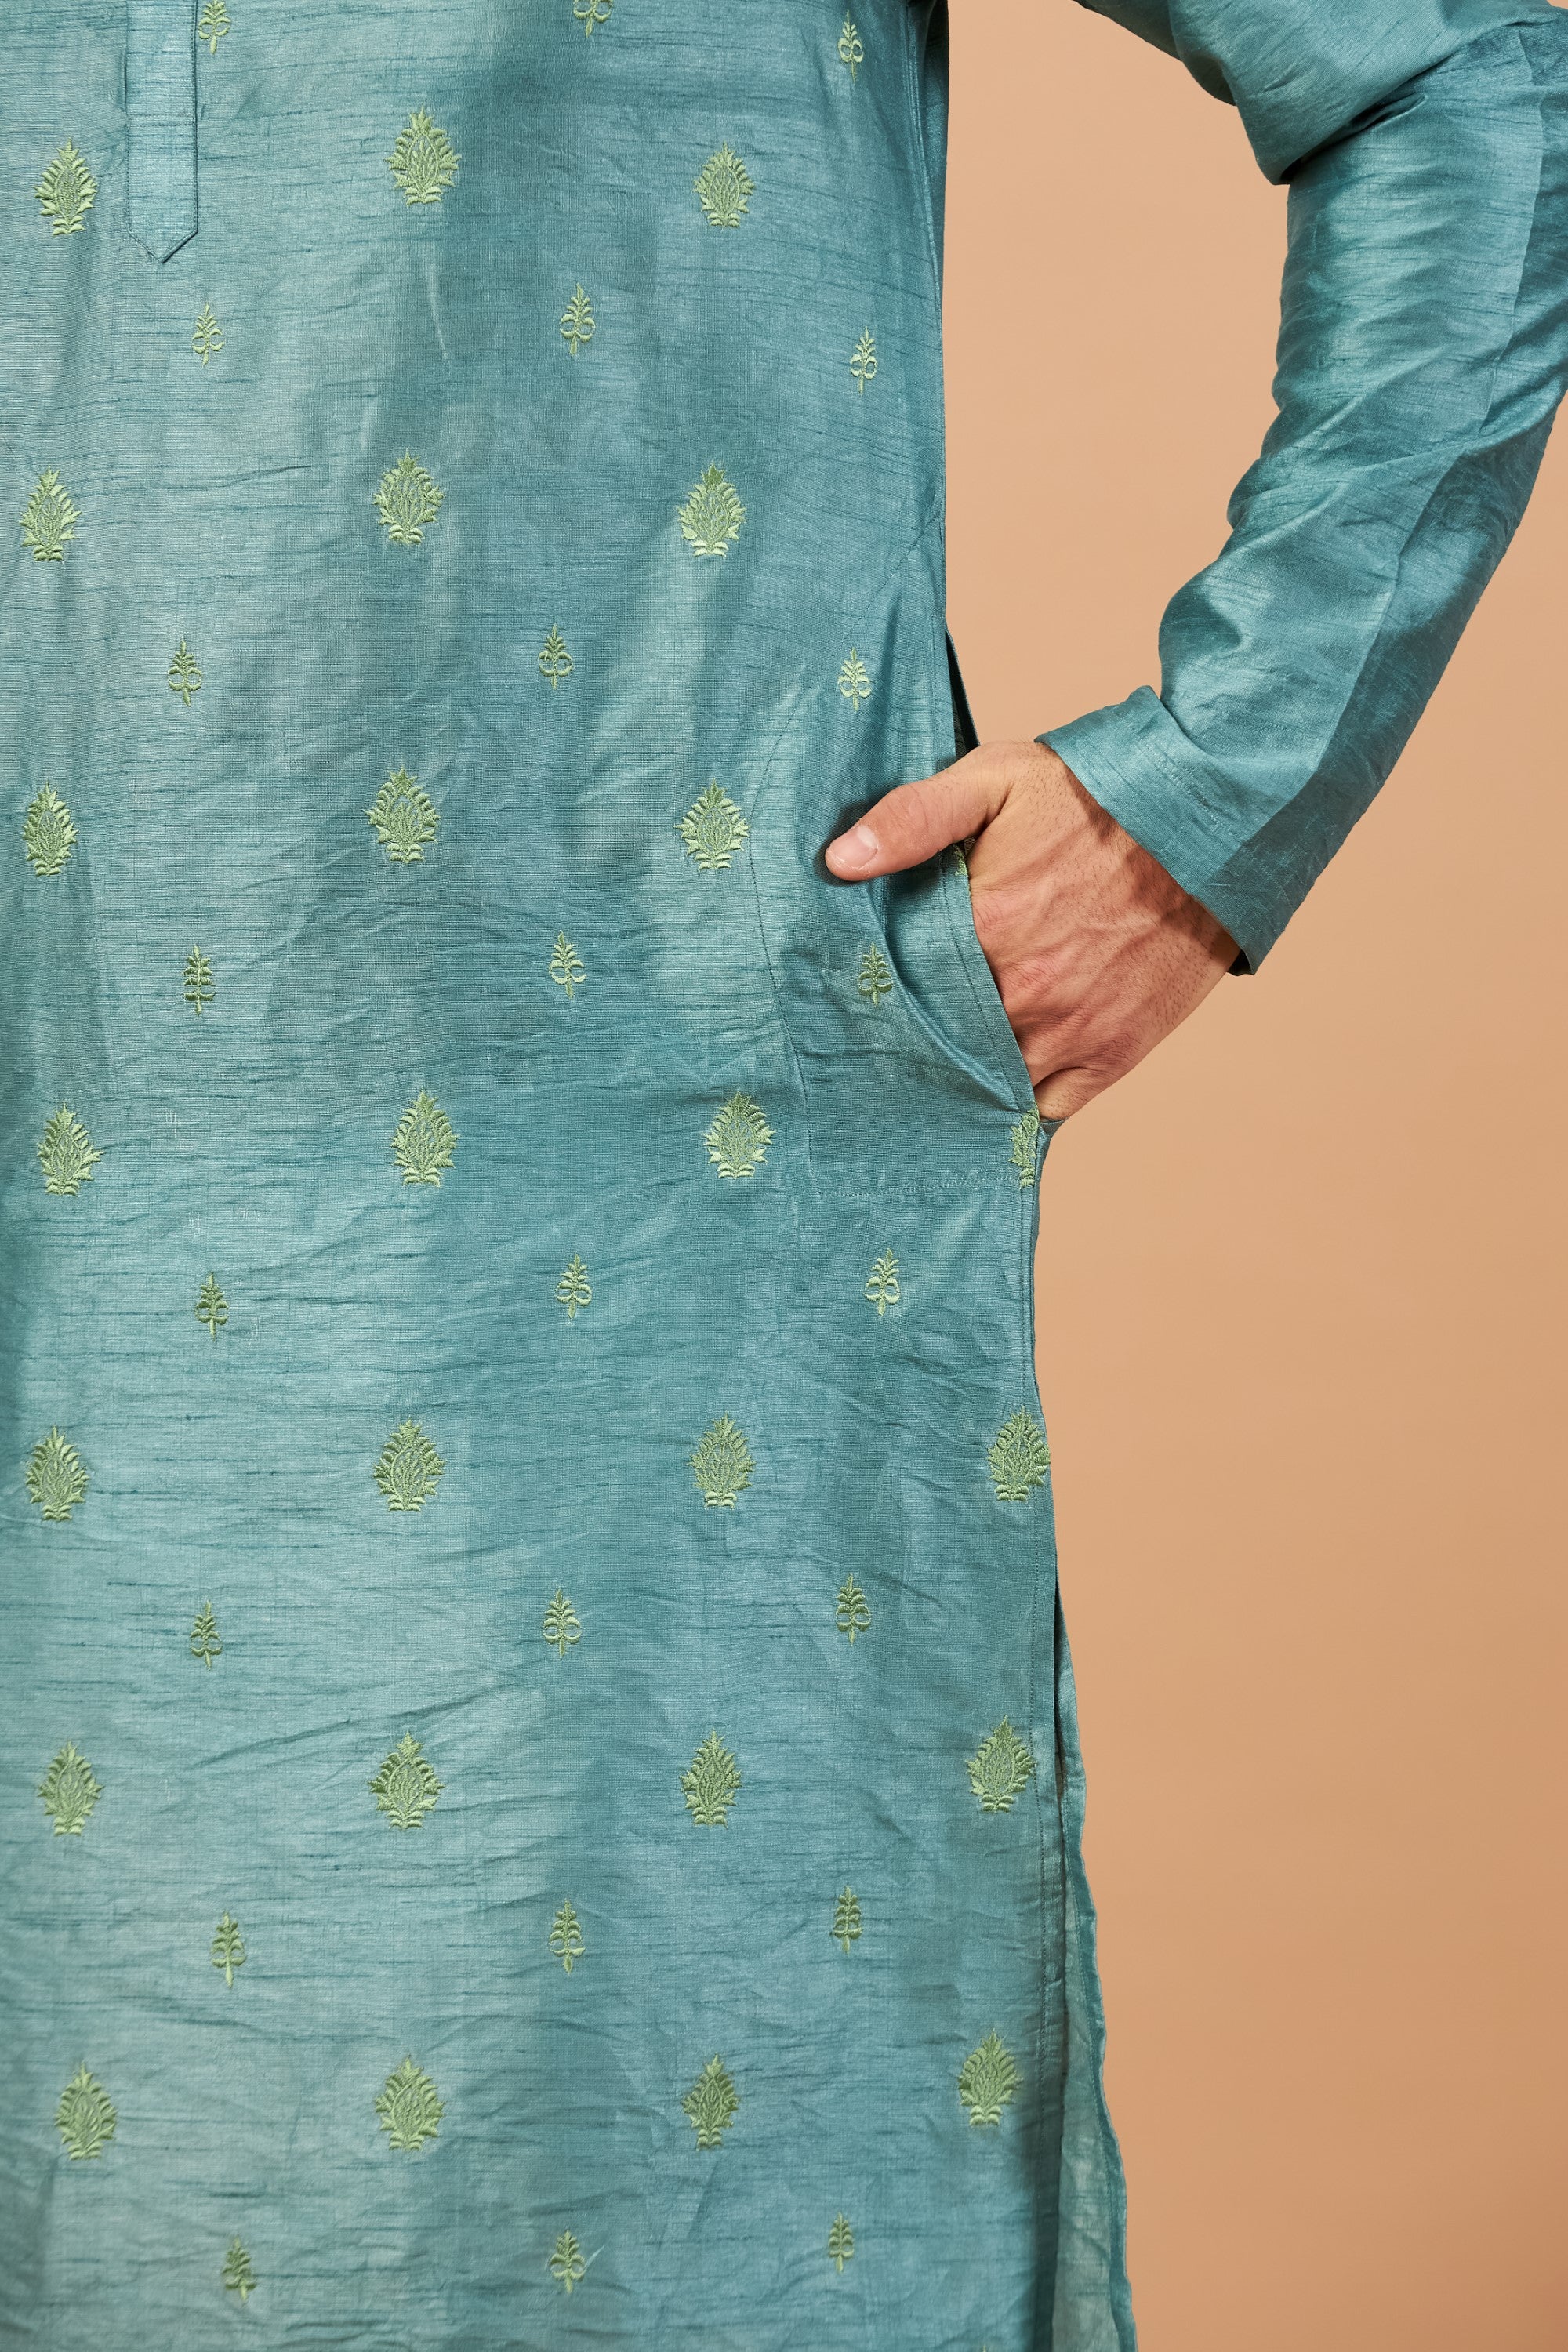 Men's Greafy Two Motif Embroidered Green Kurta With Crop Pants - Hilo Design